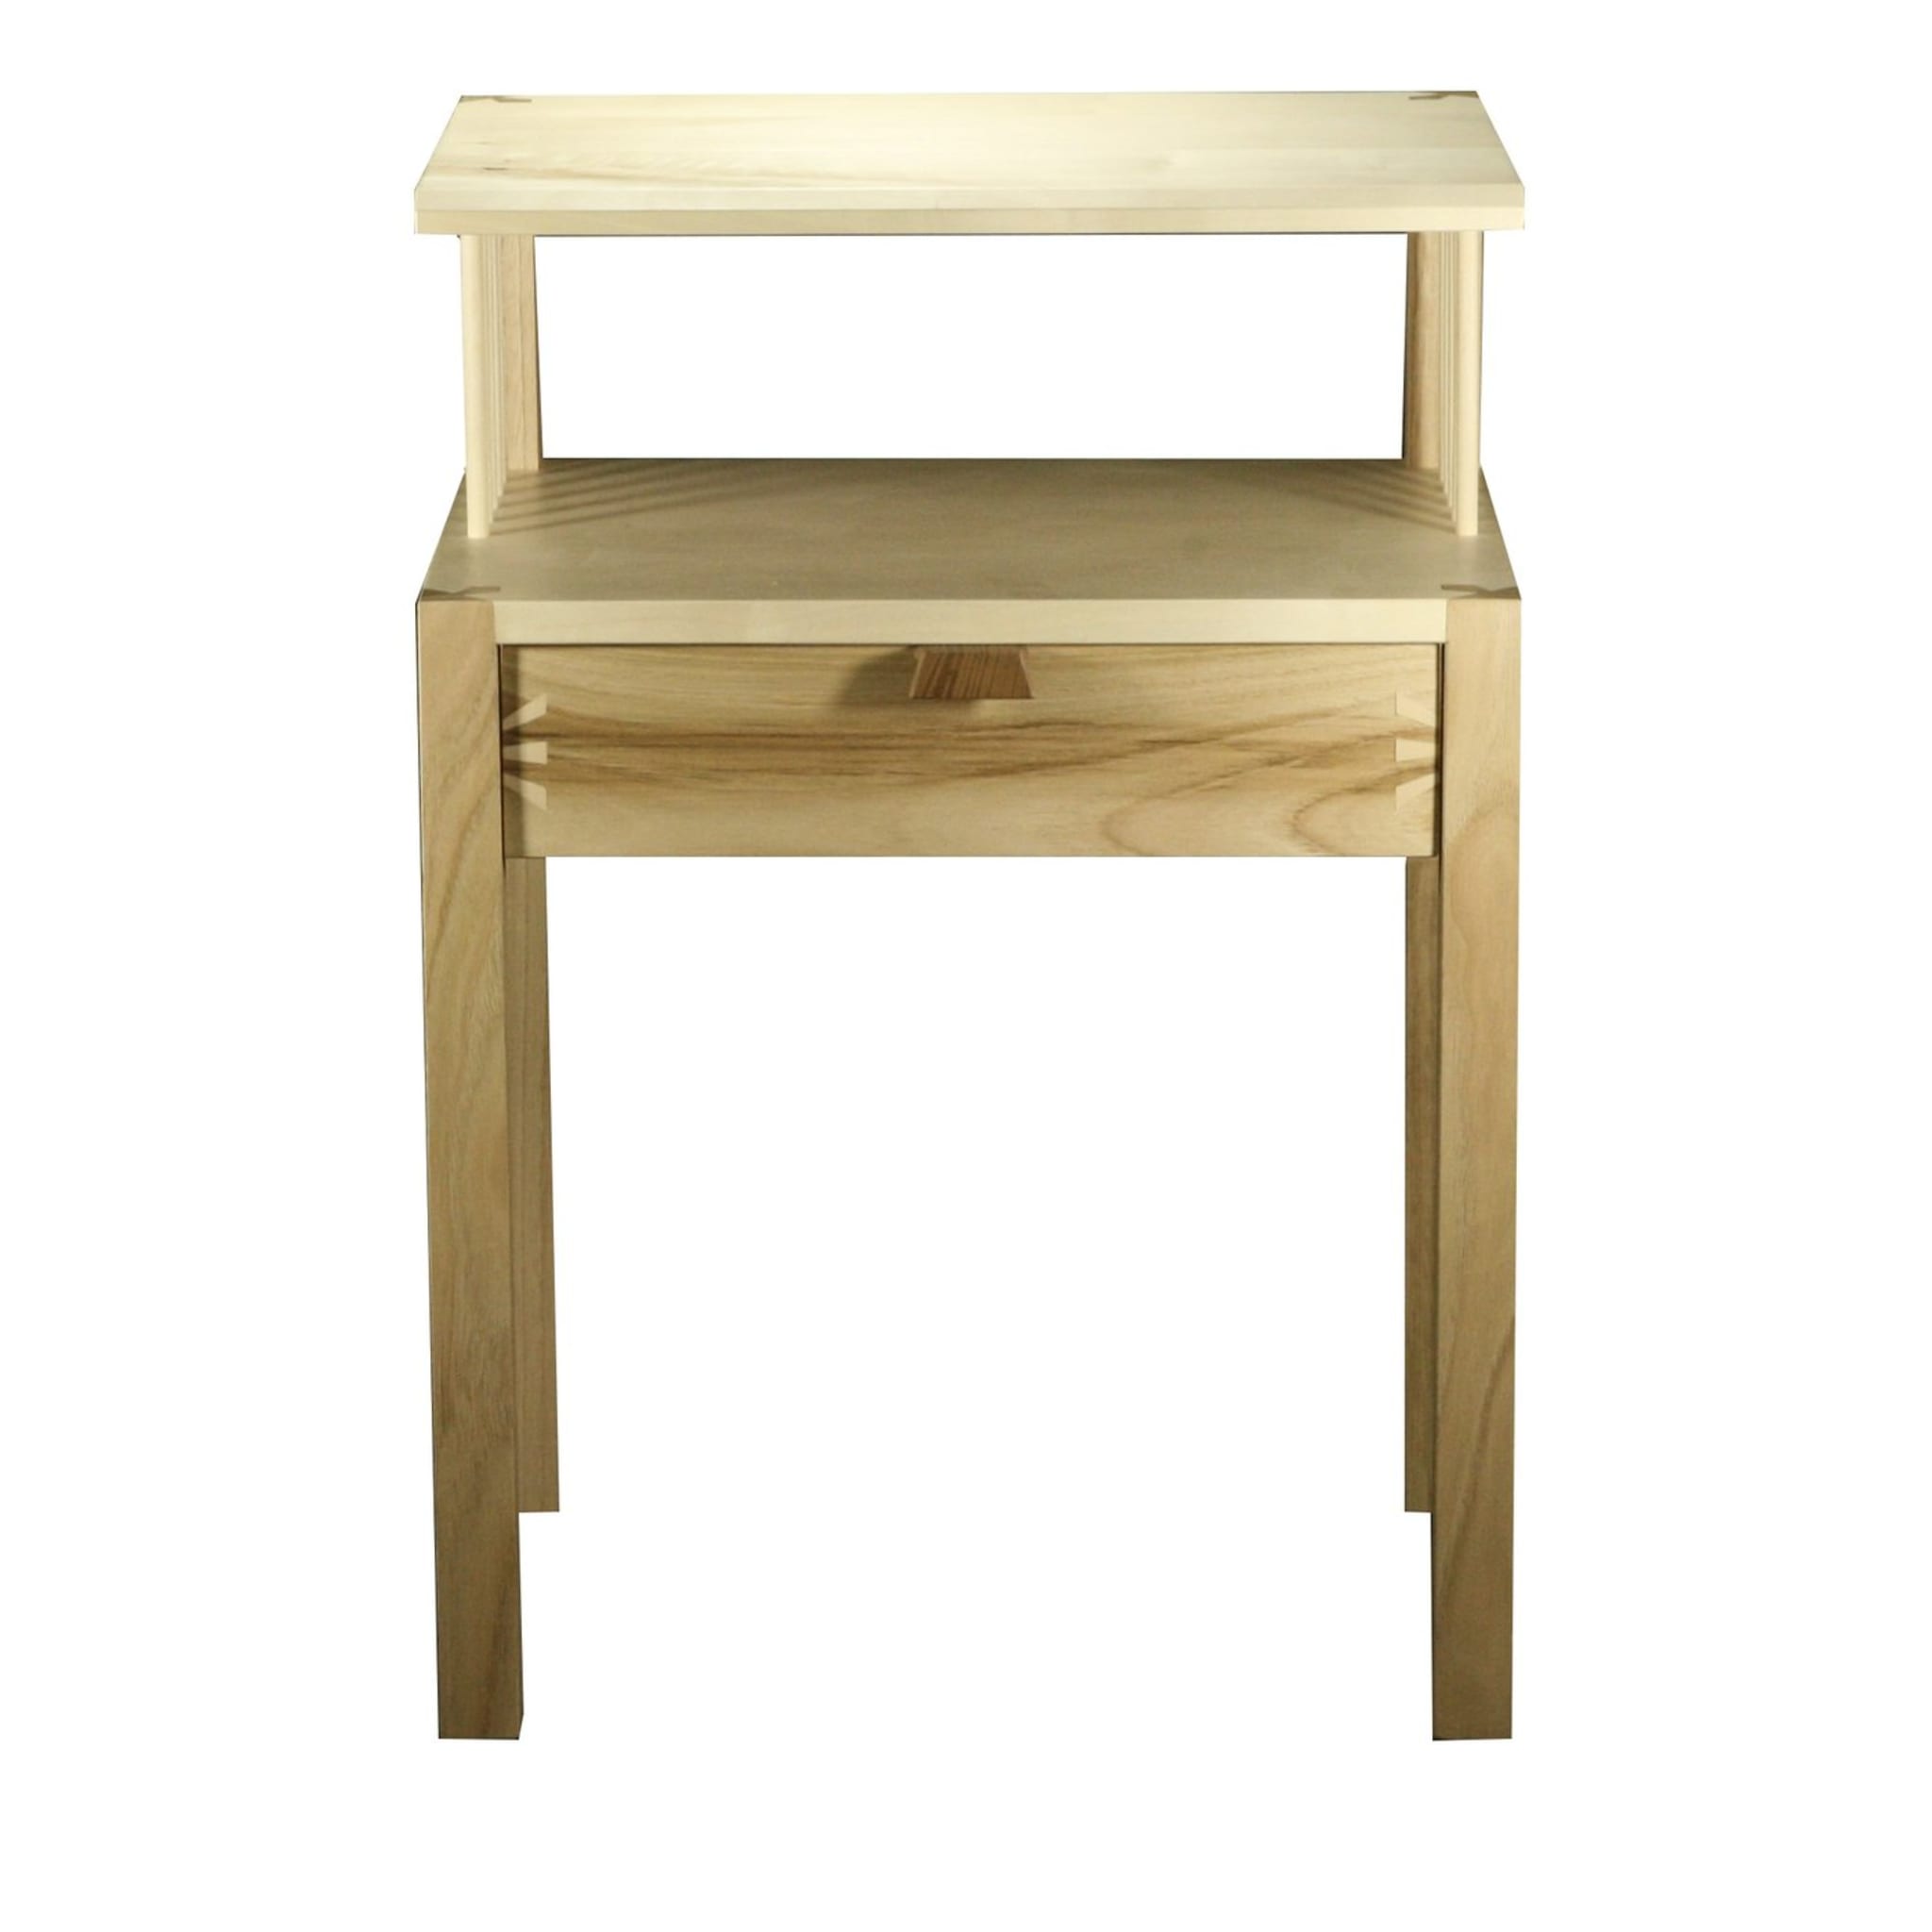 Bedtime for Joinery Nightstand - Main view